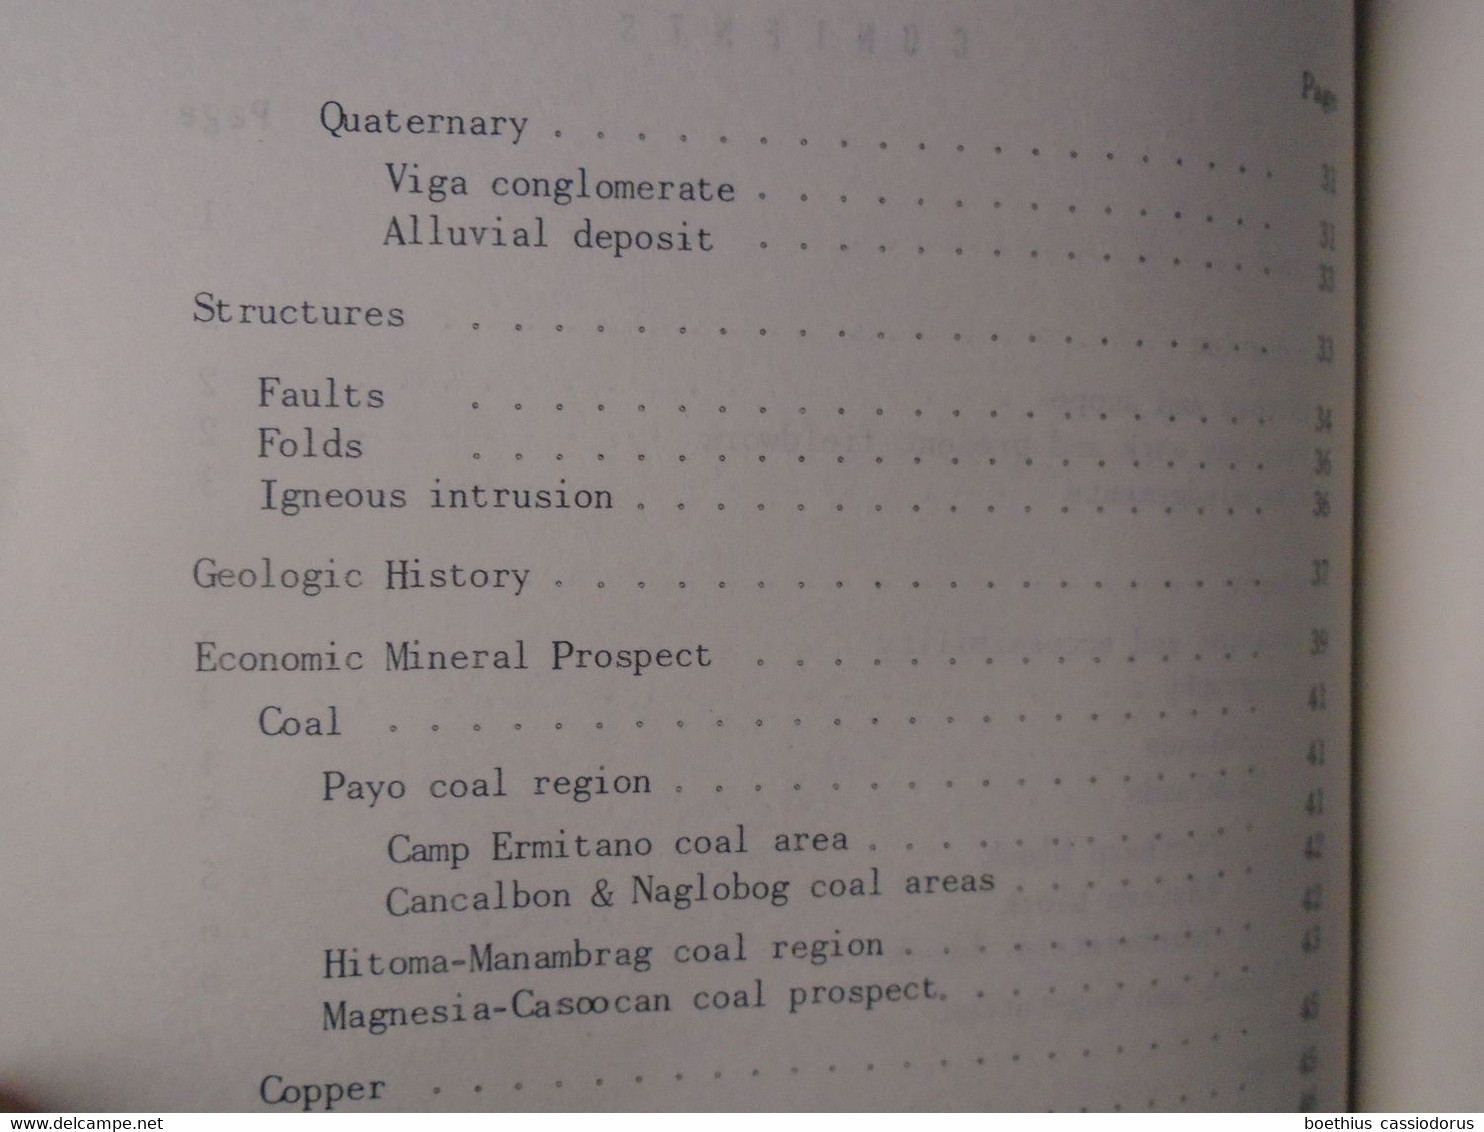 THE GEOLOGY AND MINERAL RESOURCES OF CATANDUANES PROVINCE BY FEDERICO E. MIRANDA & BASSANIO S. VARGAS 1967 PHILIPPINES - Geología